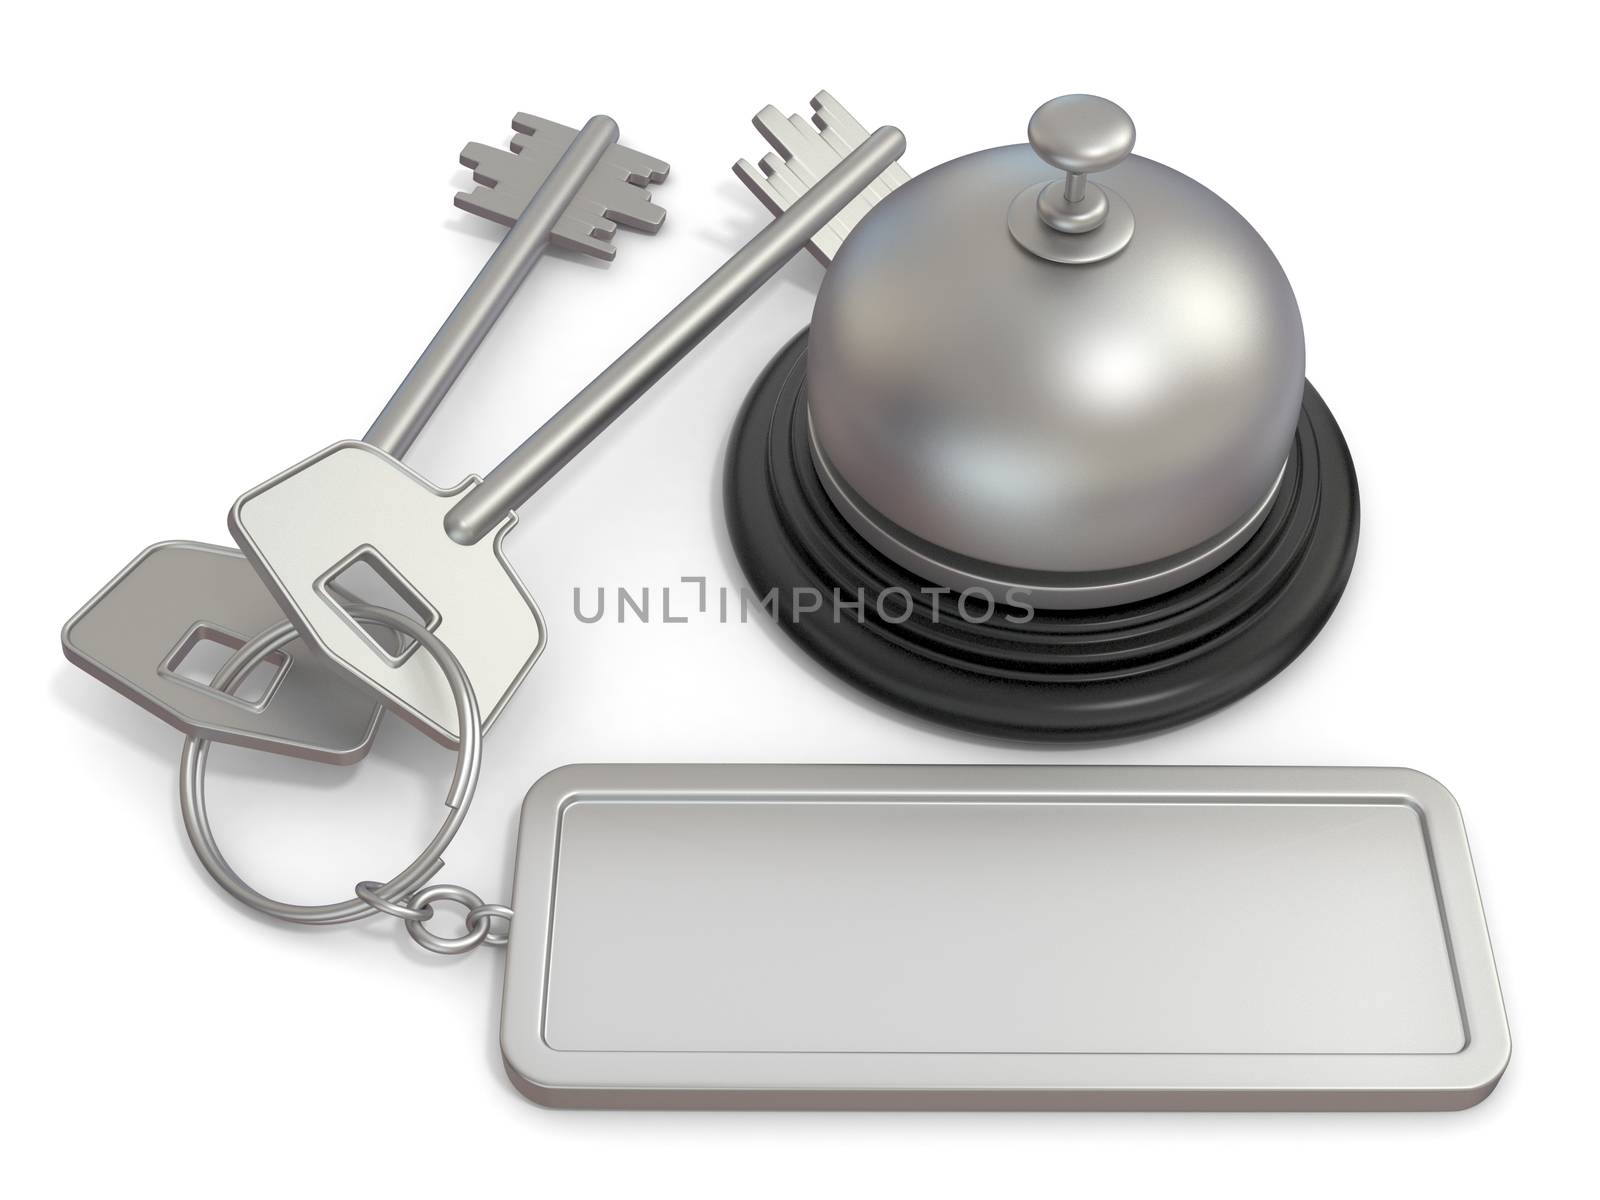 Hotel key with rectangular blank label on ring and reception bell. 3D render illustration isolated on white background